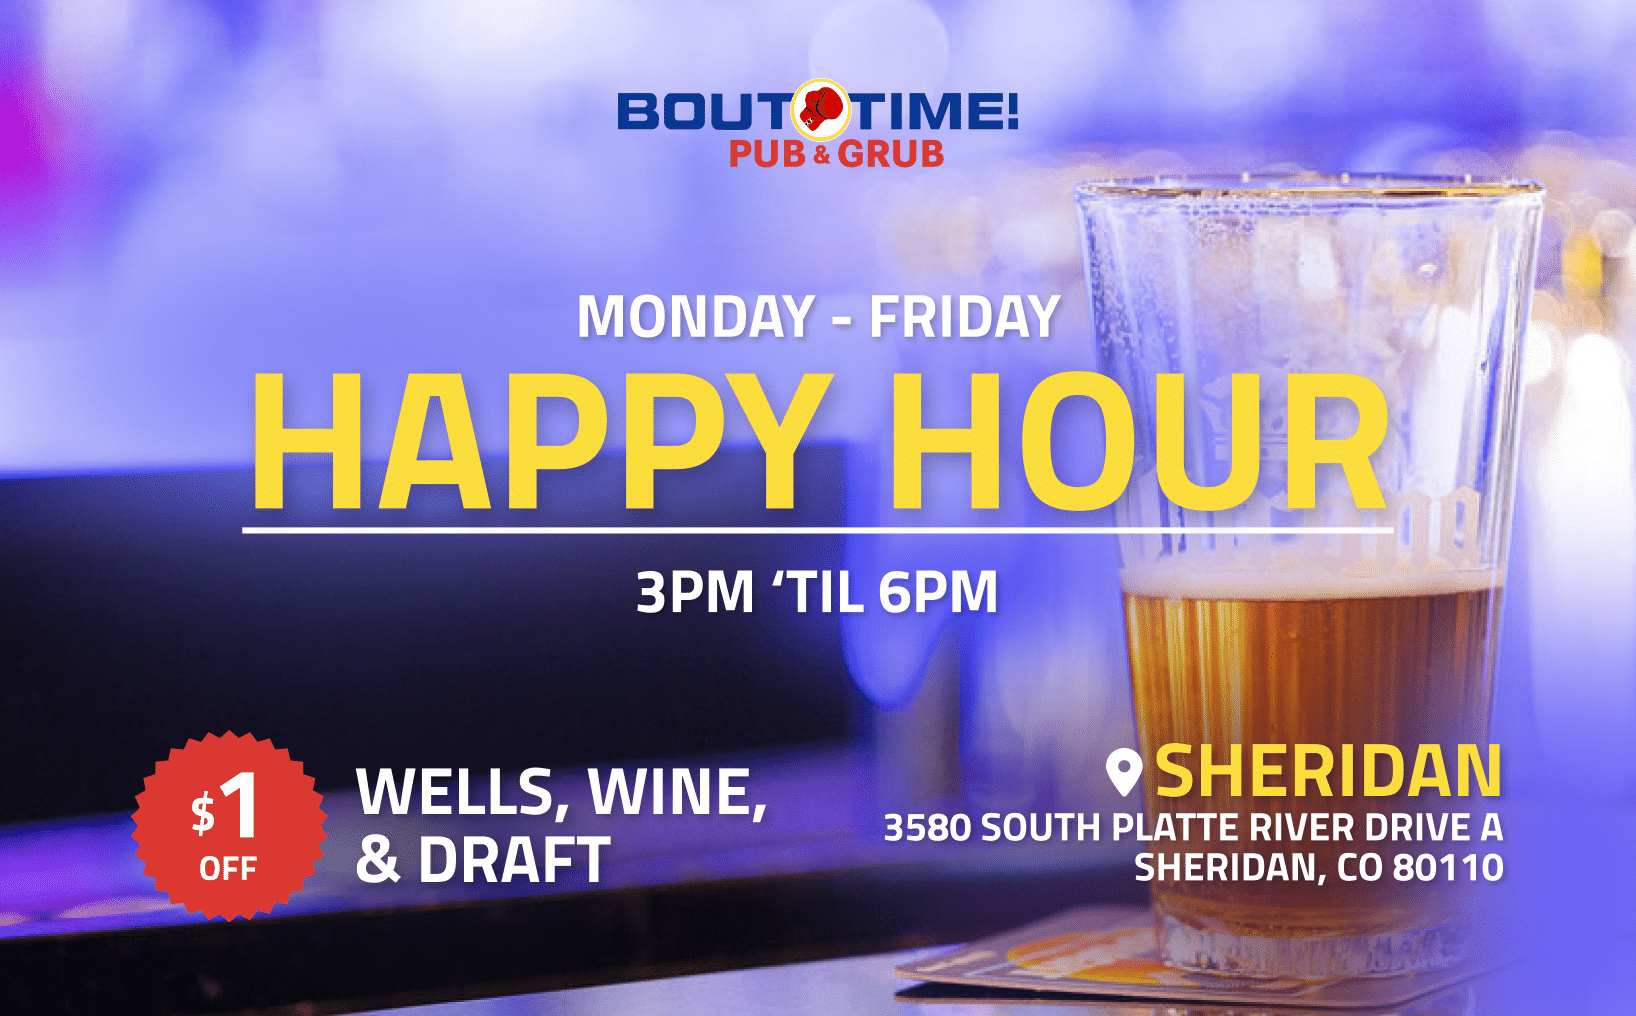 Happy Hour, Monday-Friday, 3pm to 6pm, at Sheridan Colorado location of Bout Time Pub & Grill